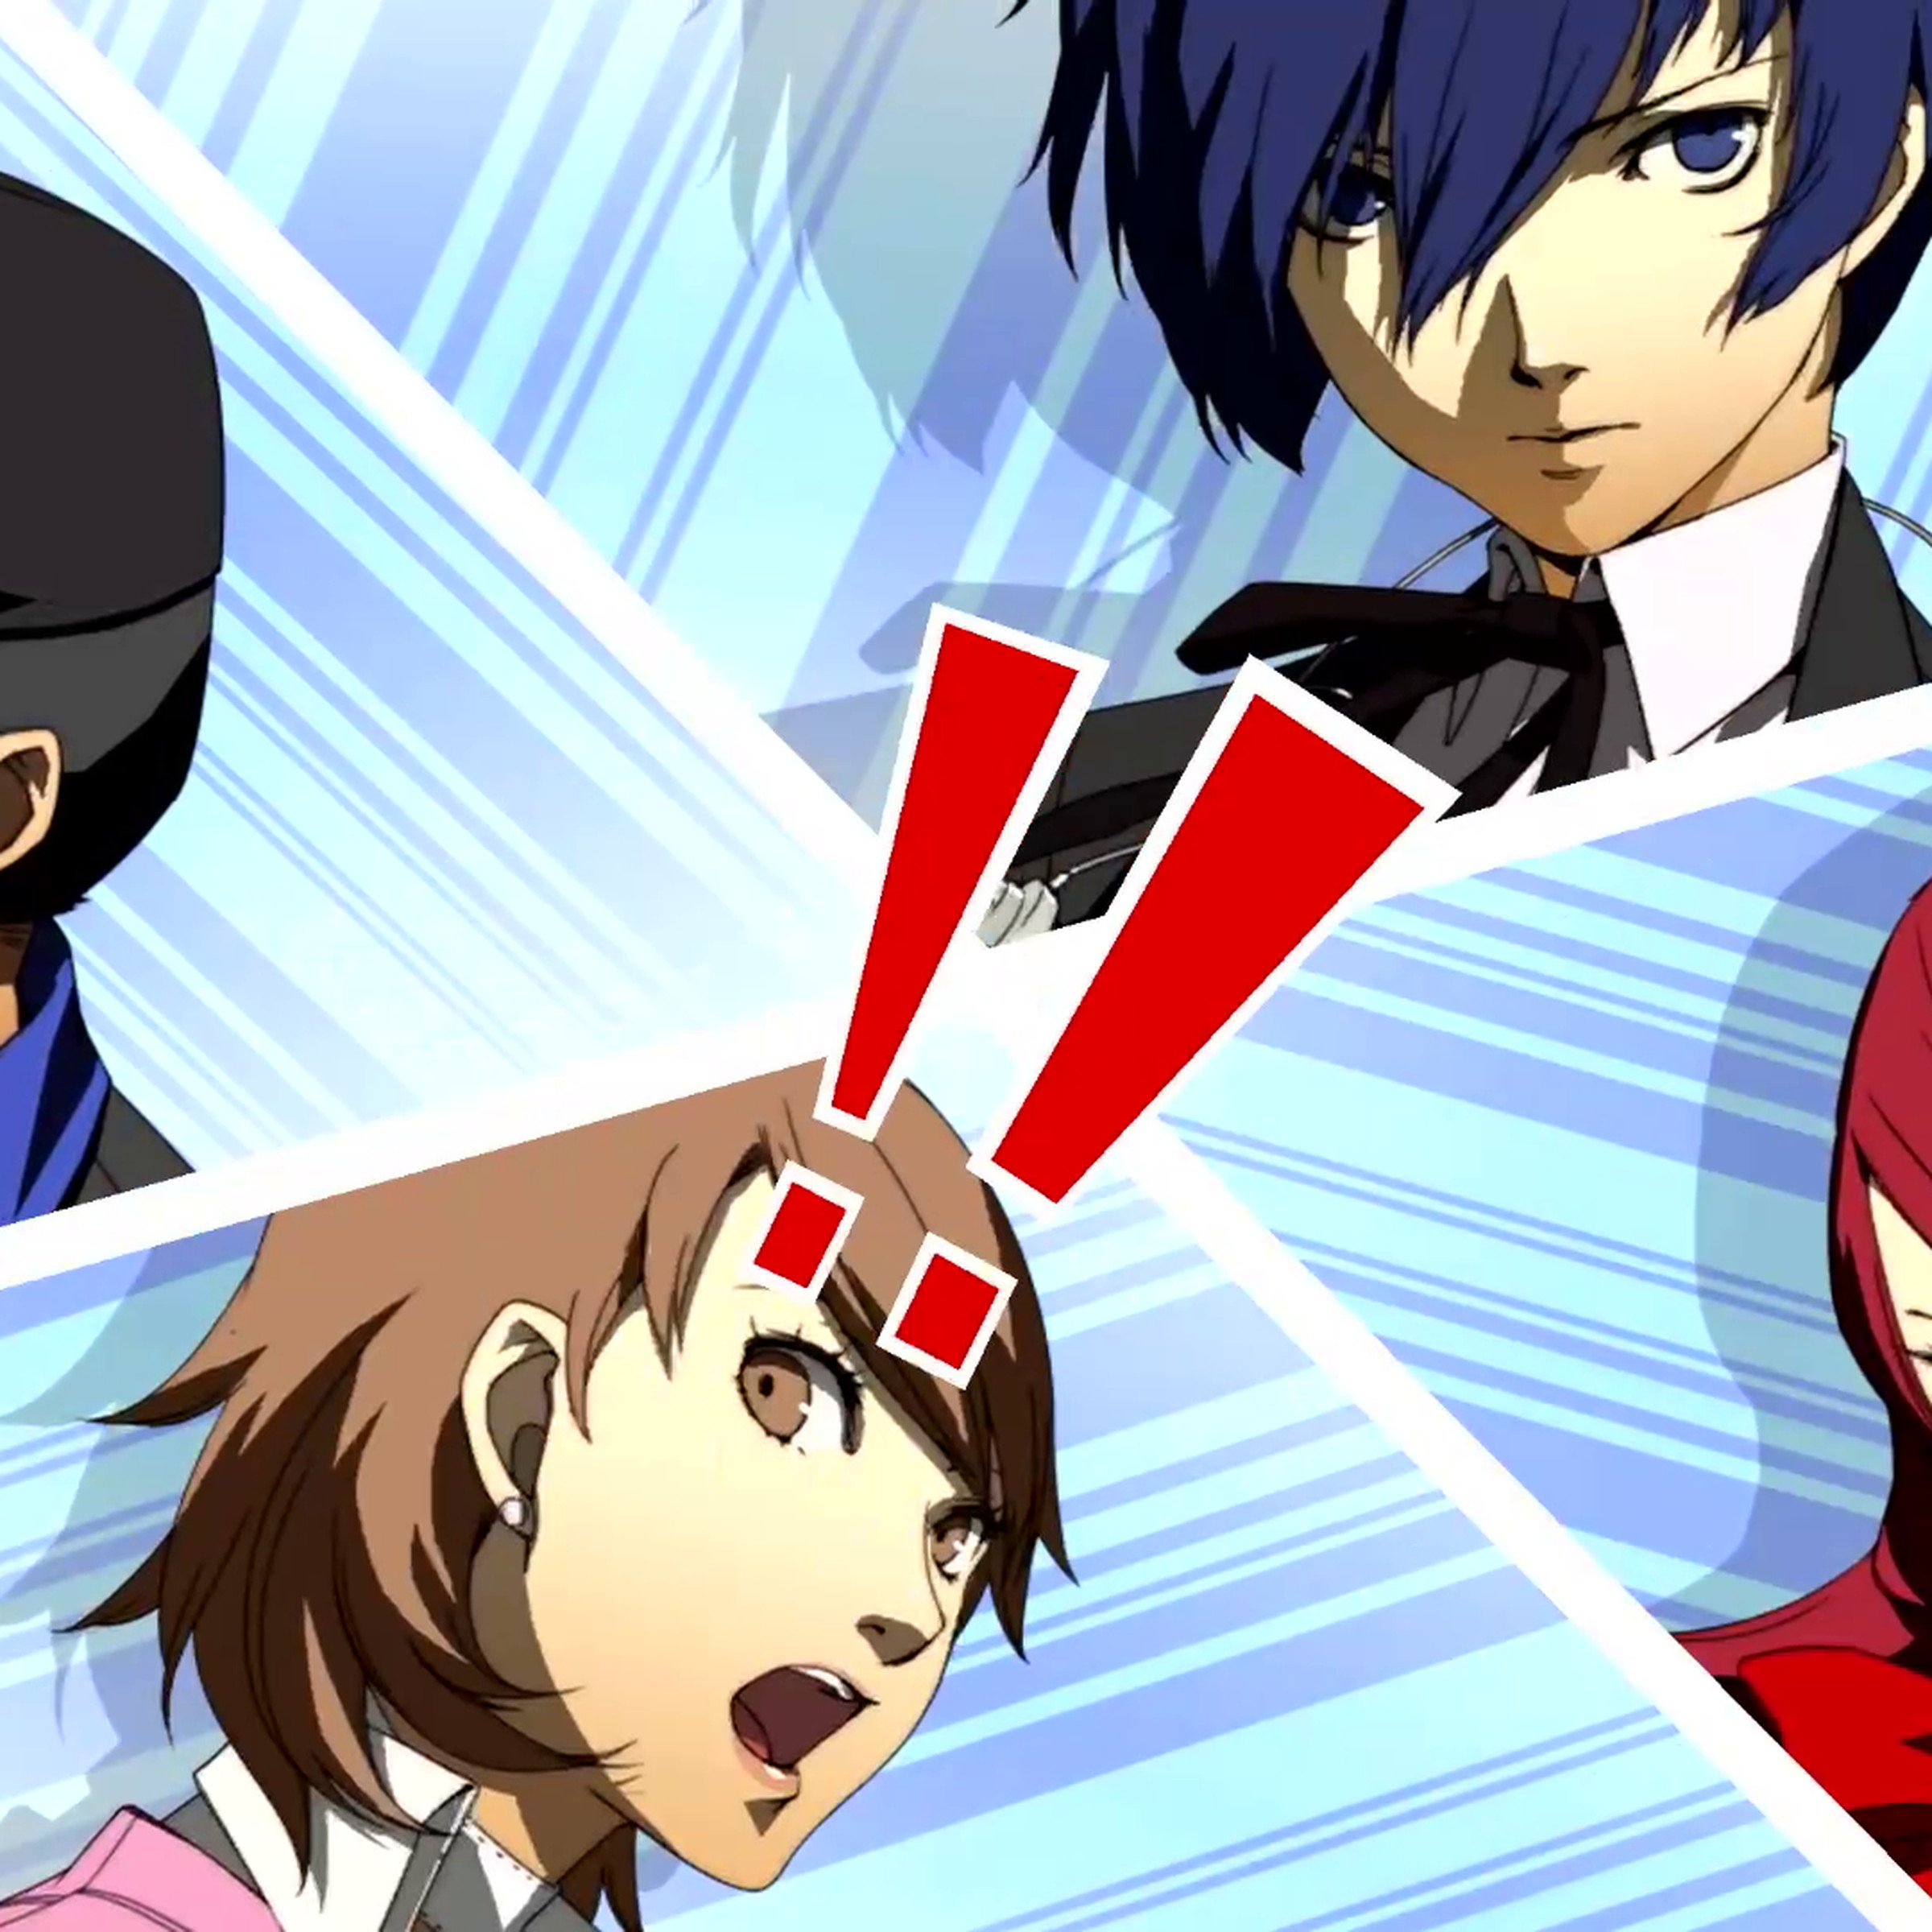 A screenshot from the video game Persona 3 Portable.